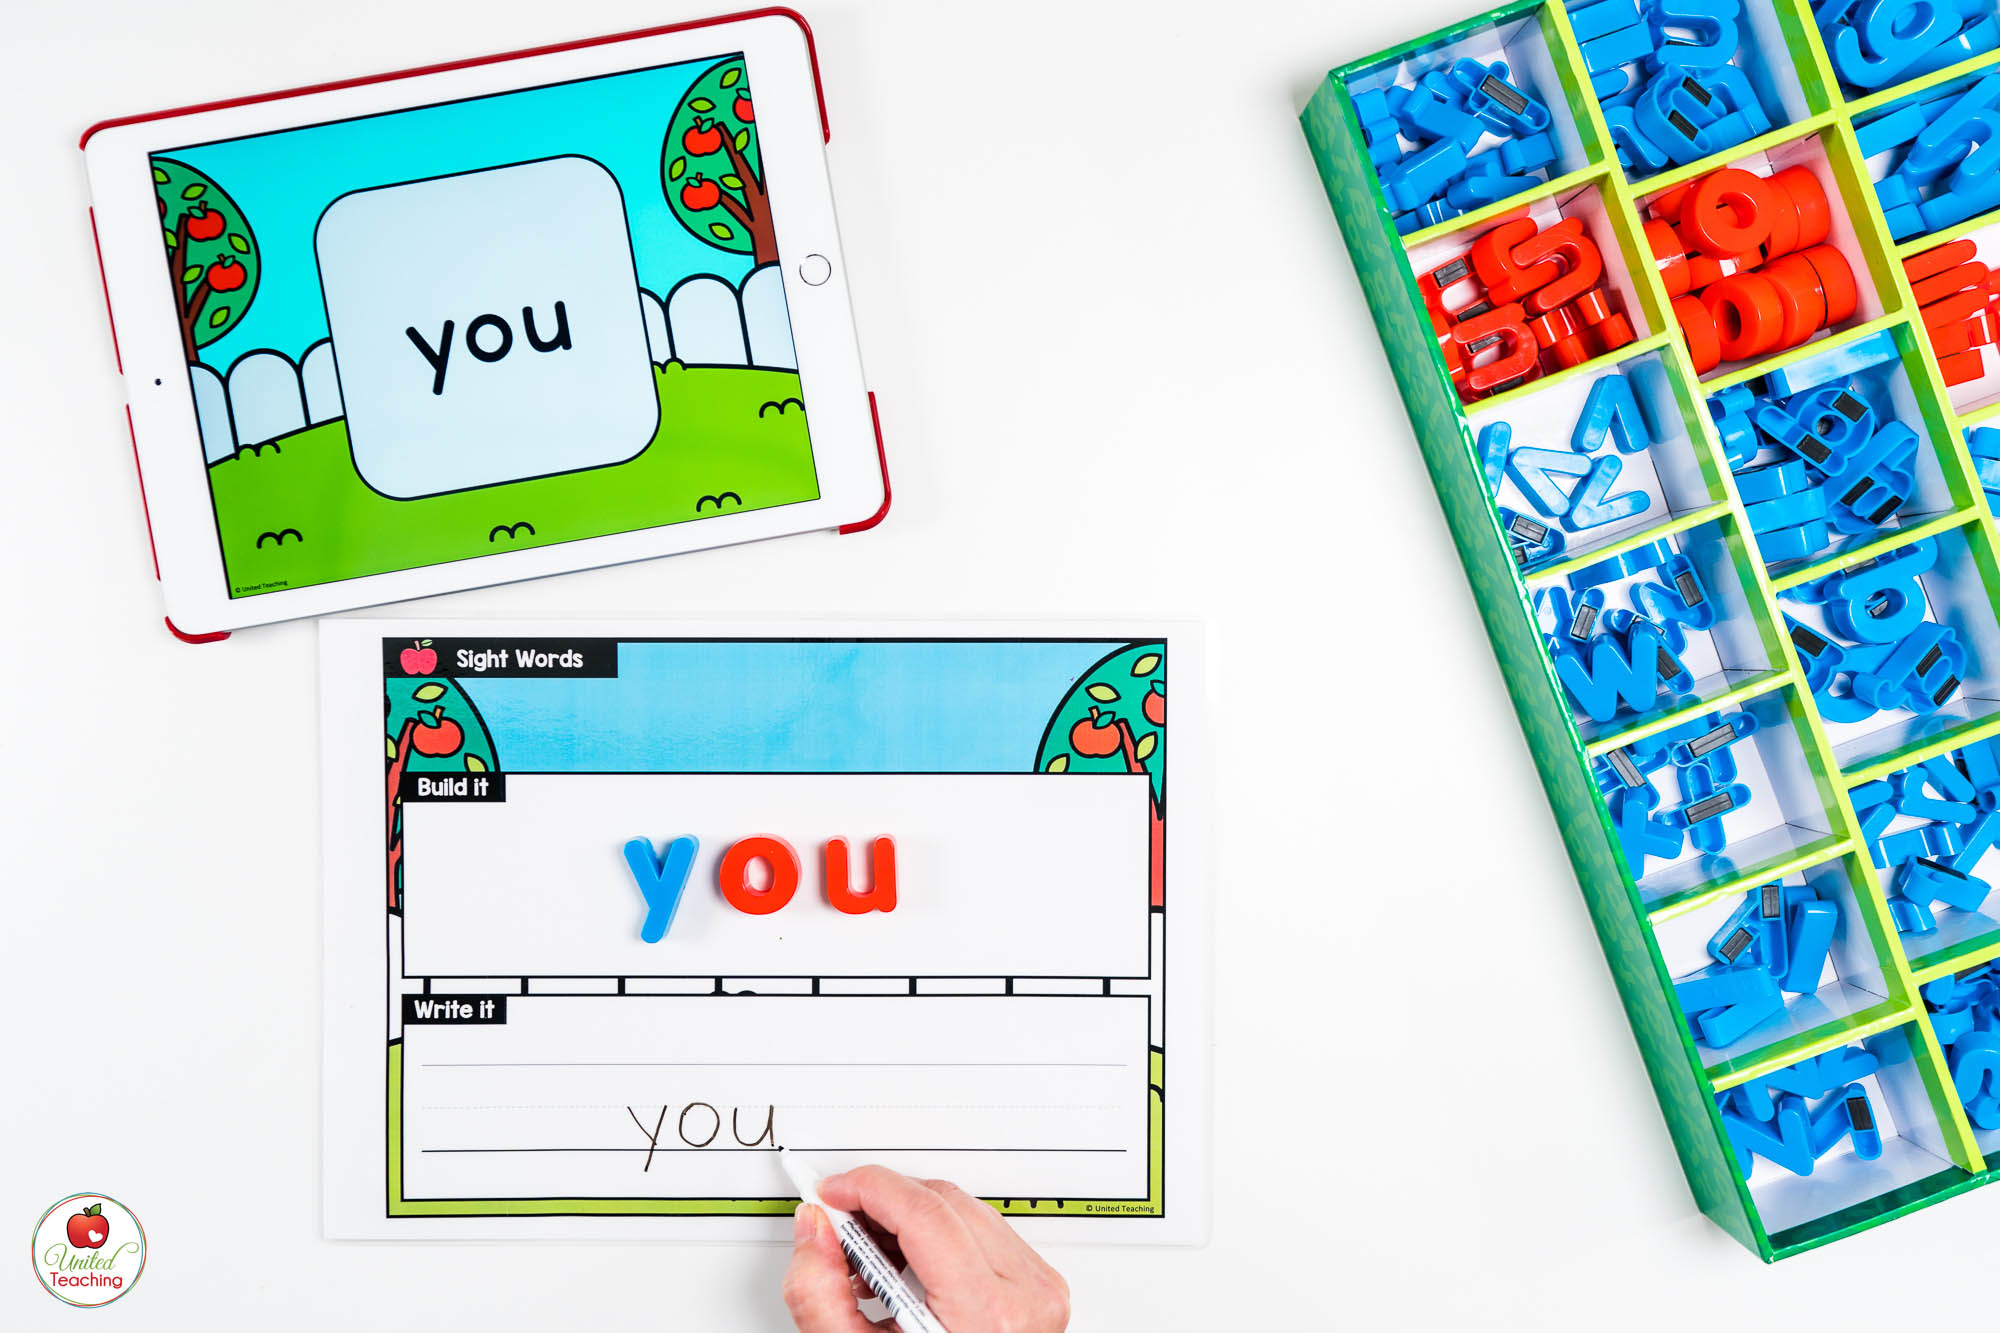 Sight Words Roll, Build, and Write Fall Literacy Center with Digital Dice